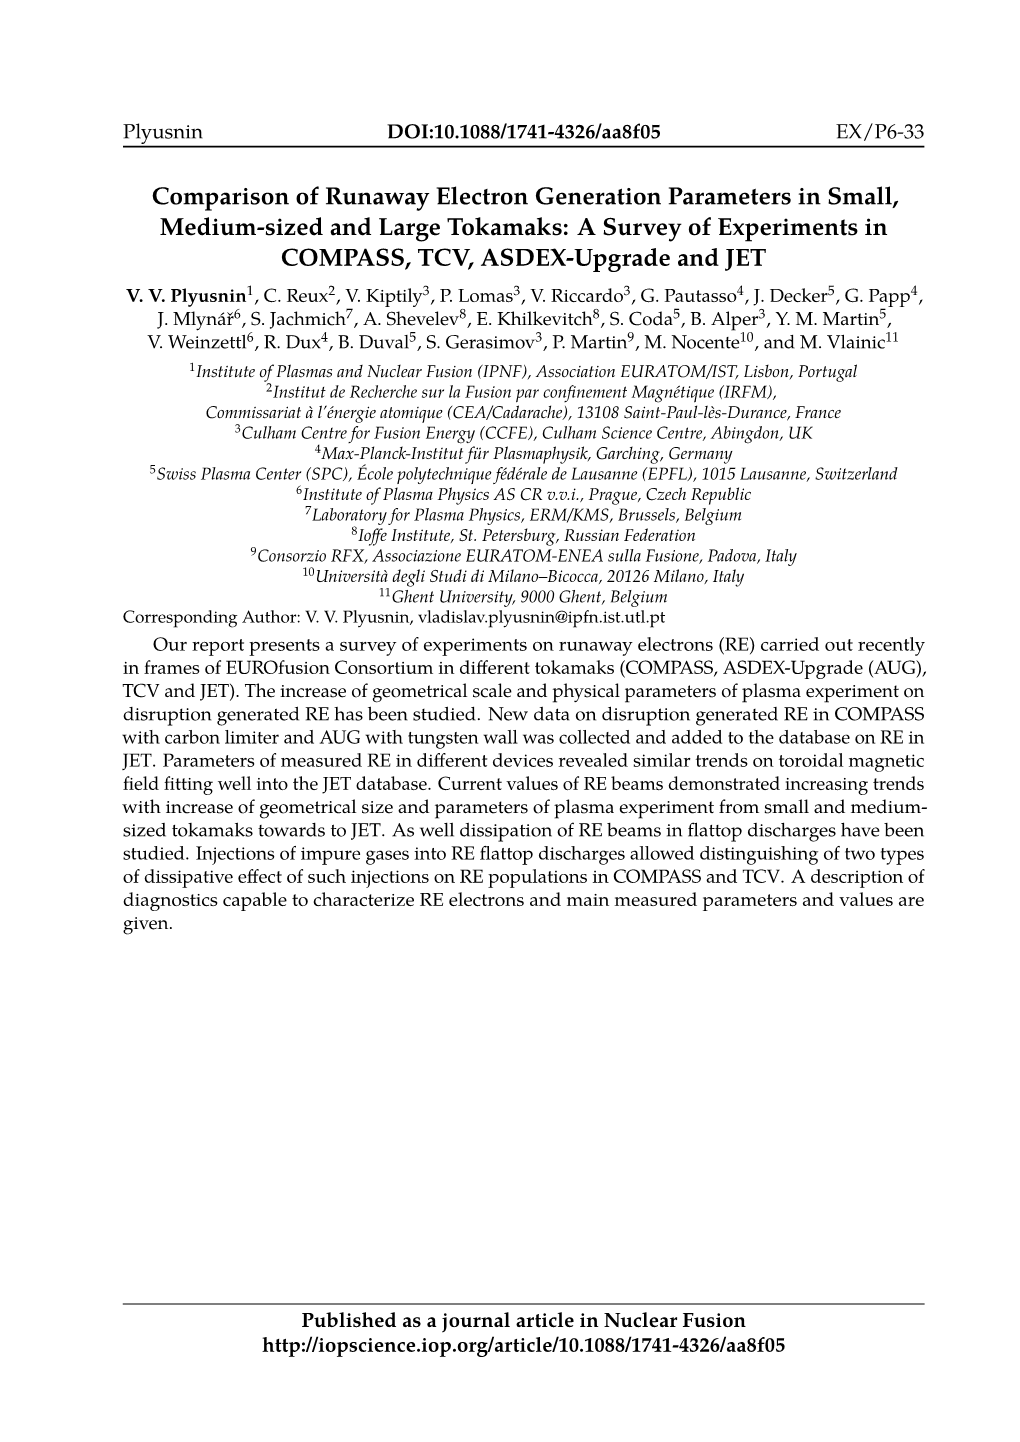 Comparison of Runaway Electron Generation Parameters in Small, Medium-Sized and Large Tokamaks: a Survey of Experiments in COMPASS, TCV, ASDEX-Upgrade and JET V